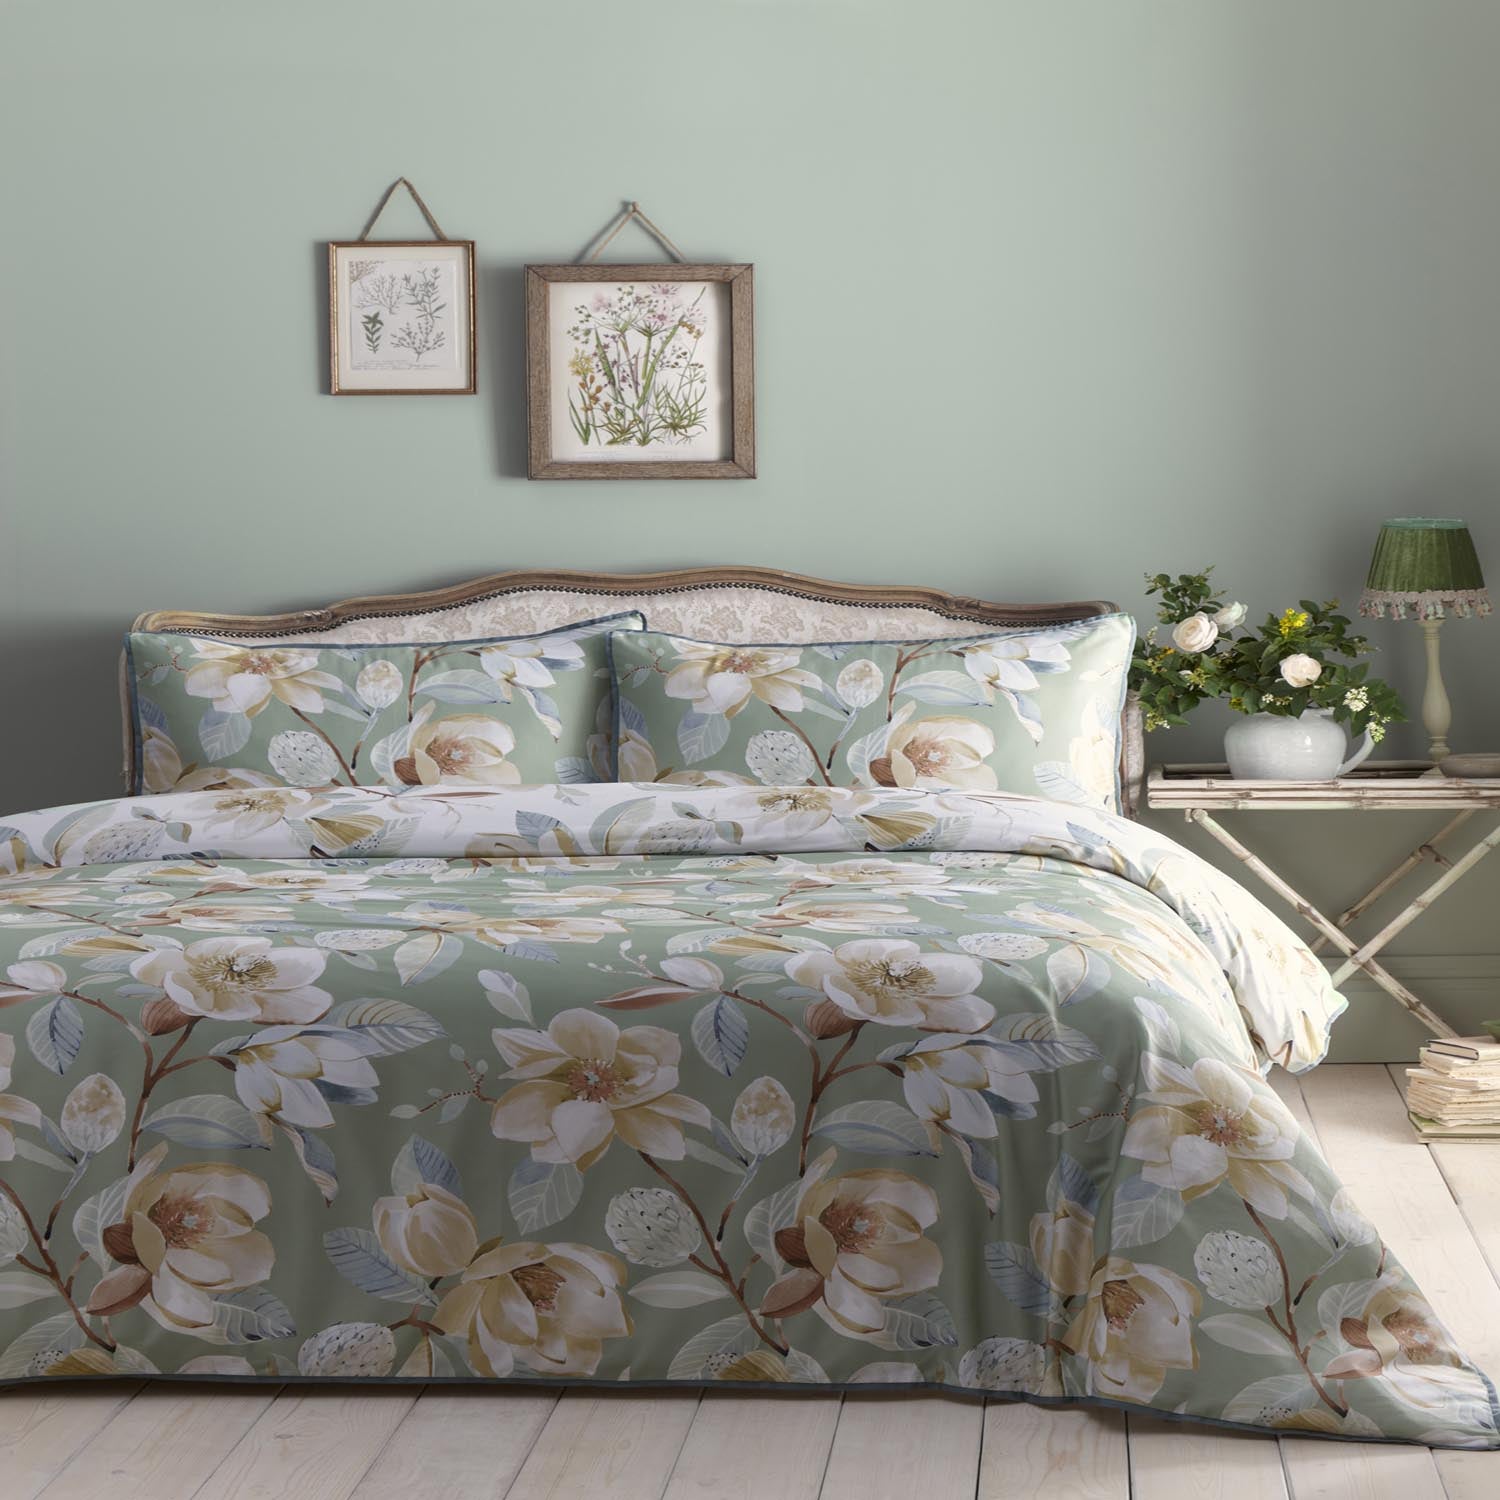  Heather And Ferne Elspeth Green Duvet Cover Set 1 Shaws Department Stores